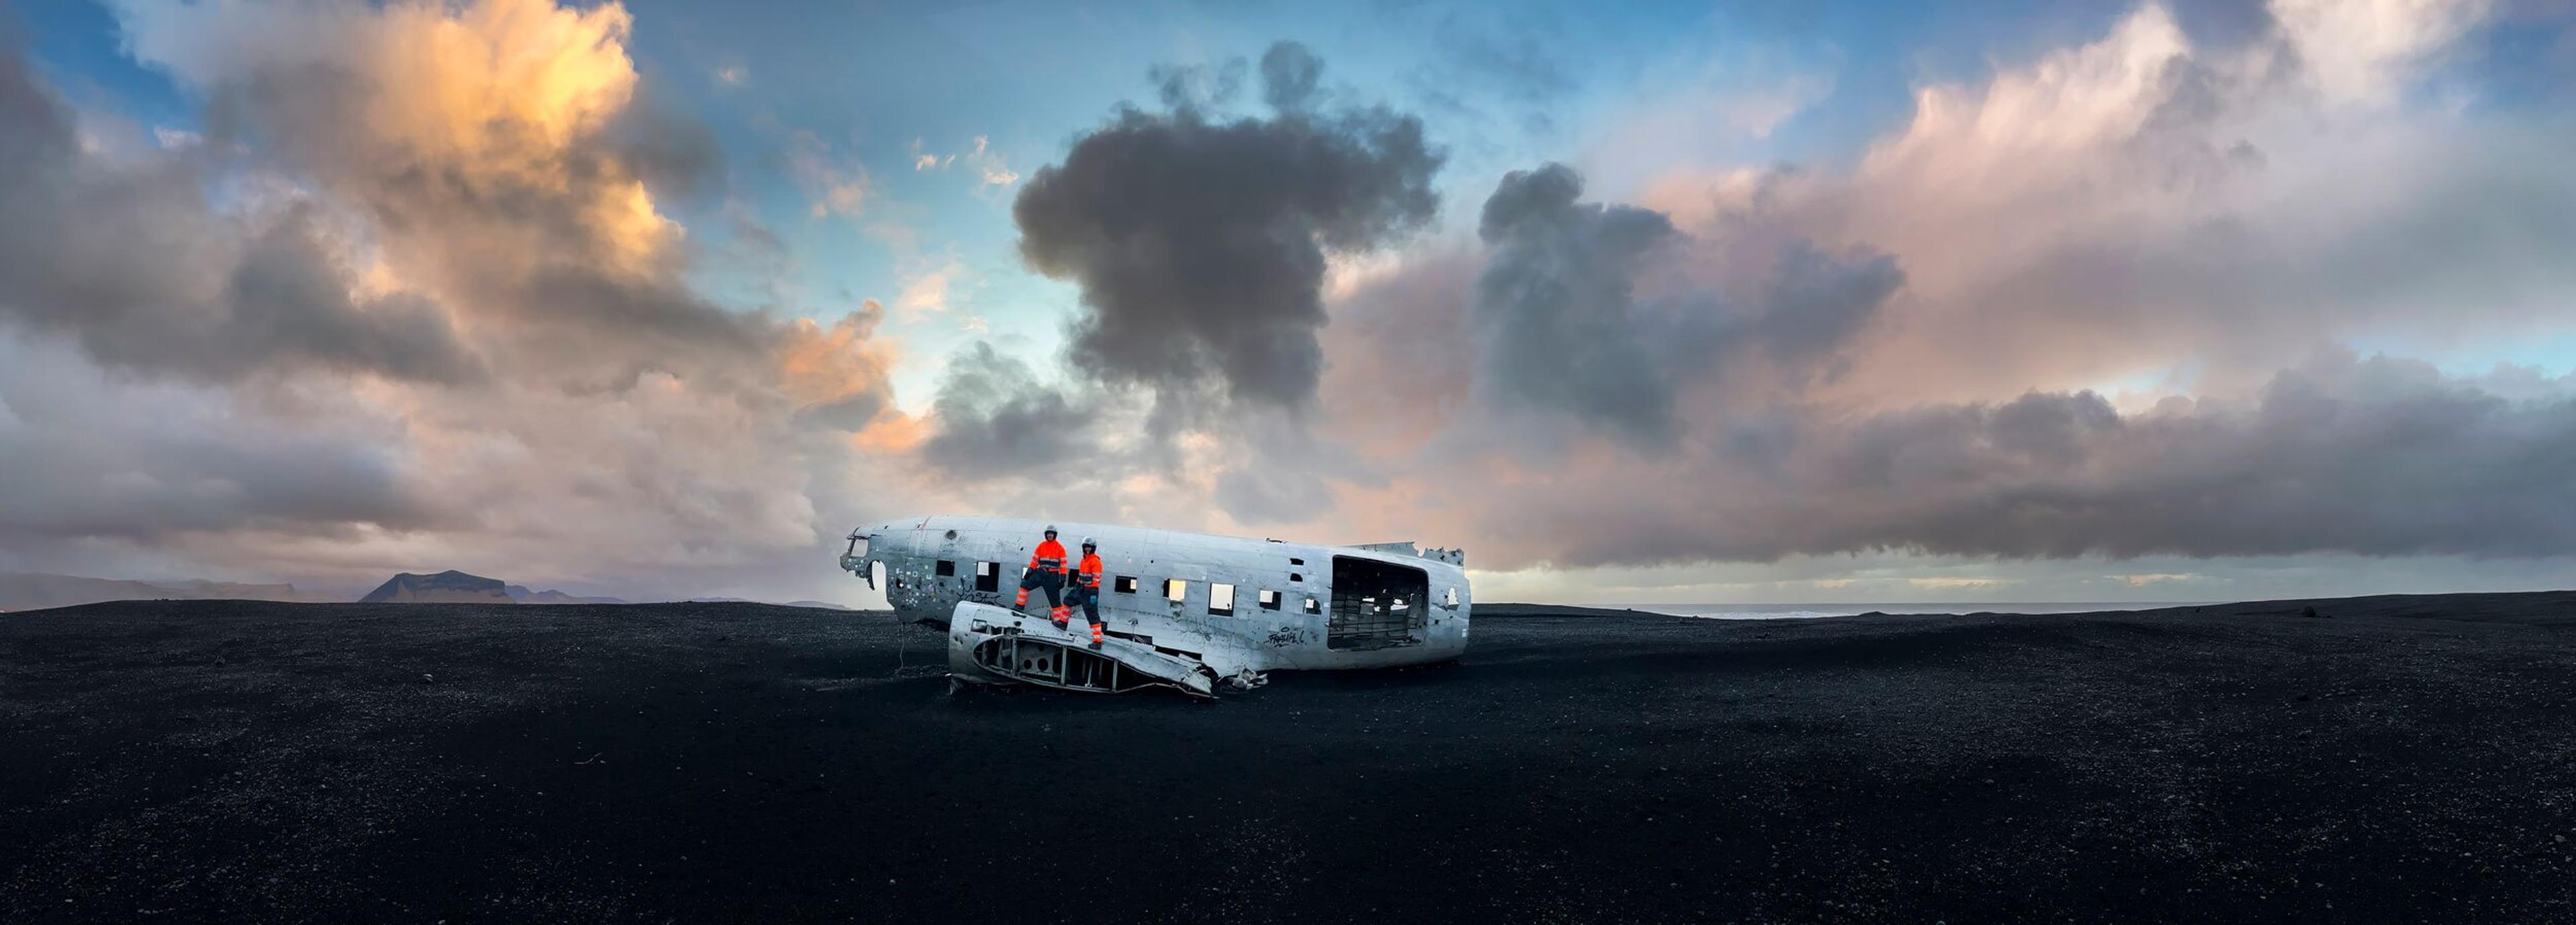 Two individuals standing on the wing of a plane wreck, with a mountain visible to the left and expansive black sand surrounding the rest.